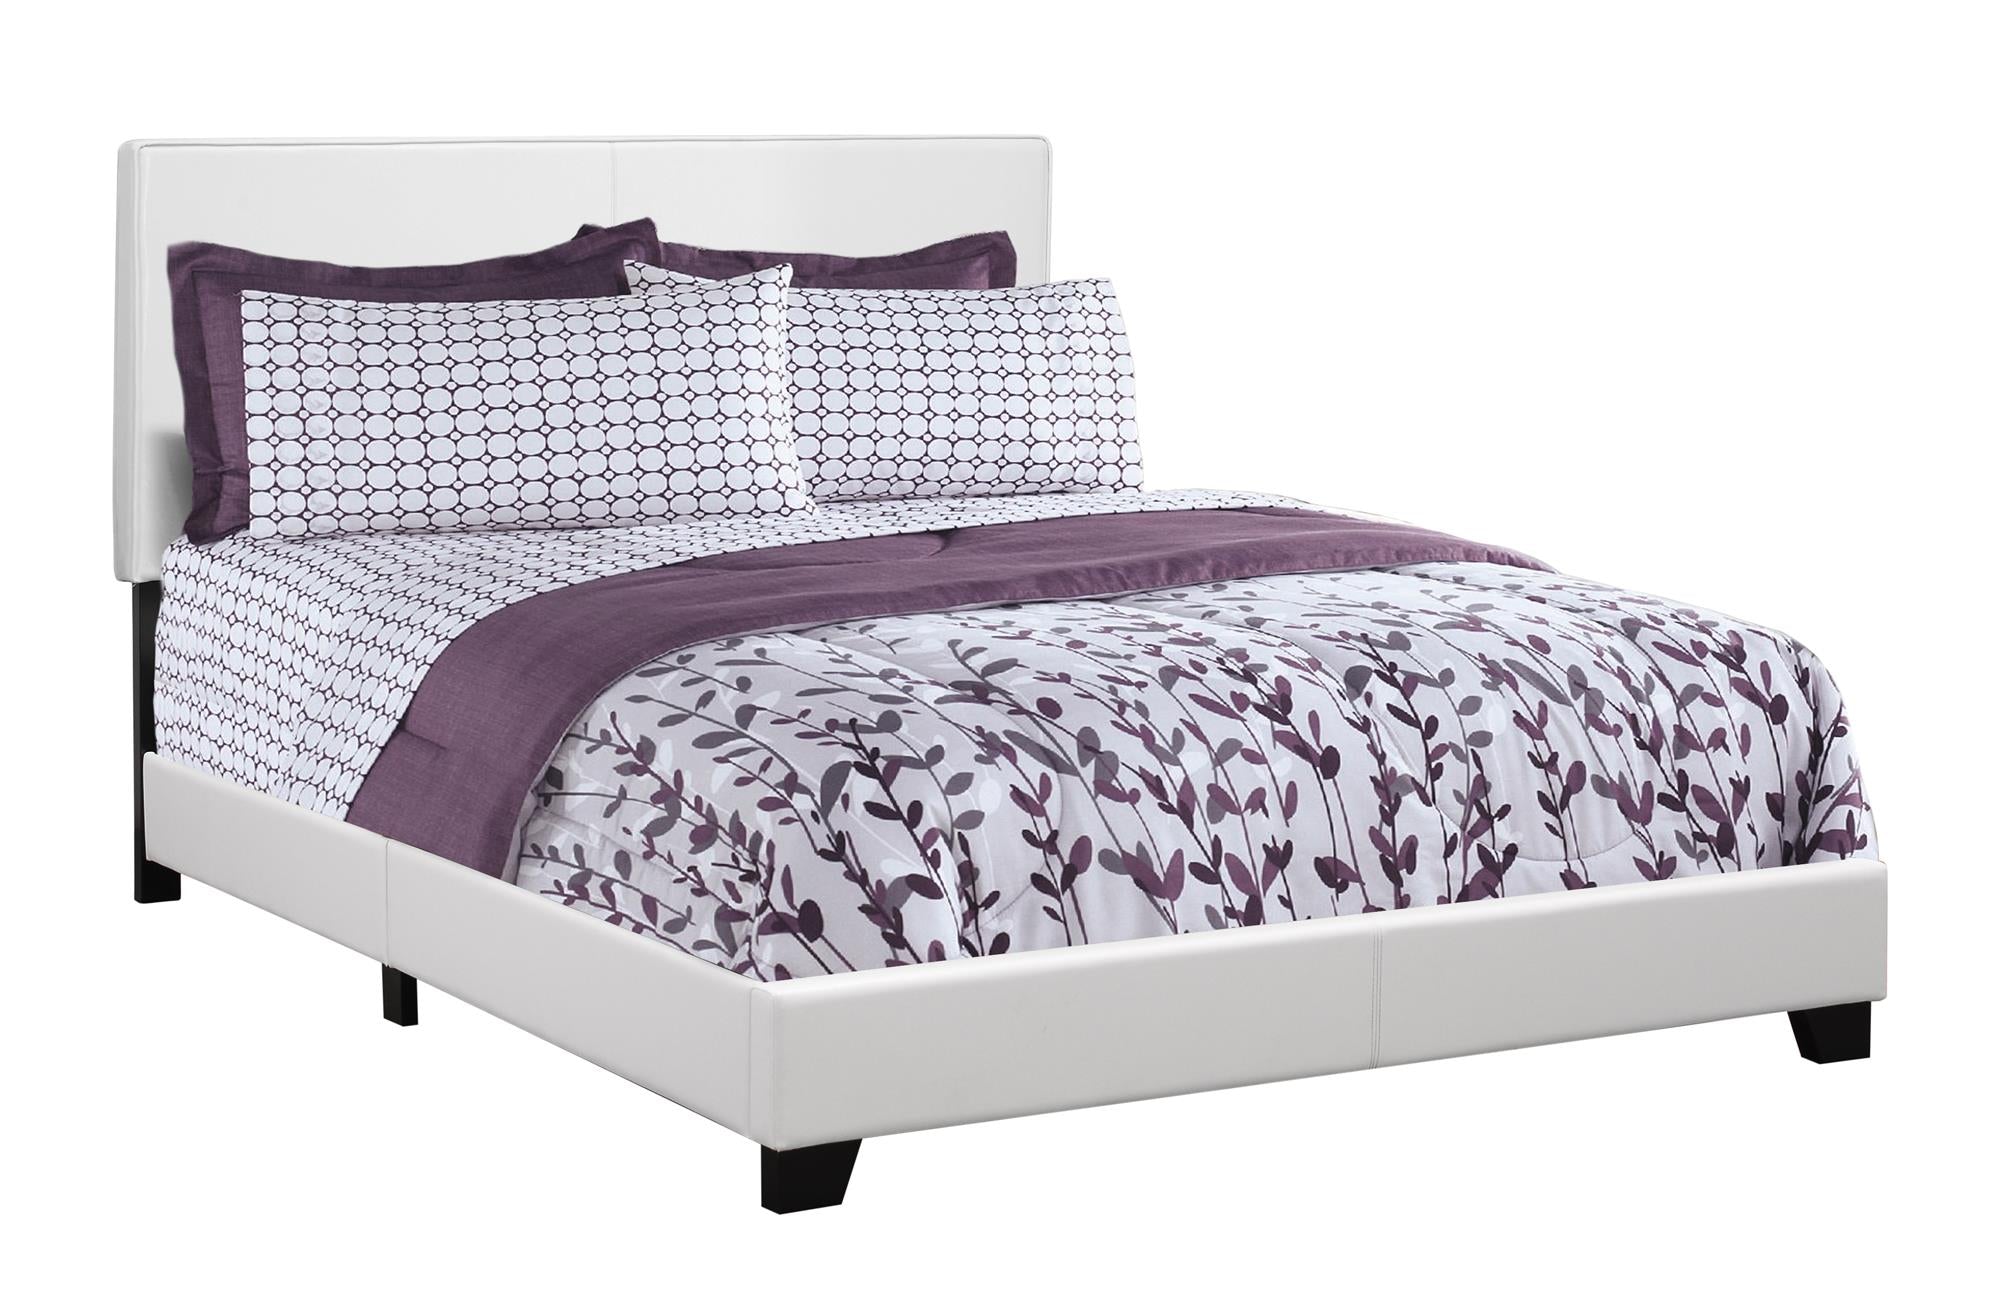 Bed - Queen Size / White Leather-Look